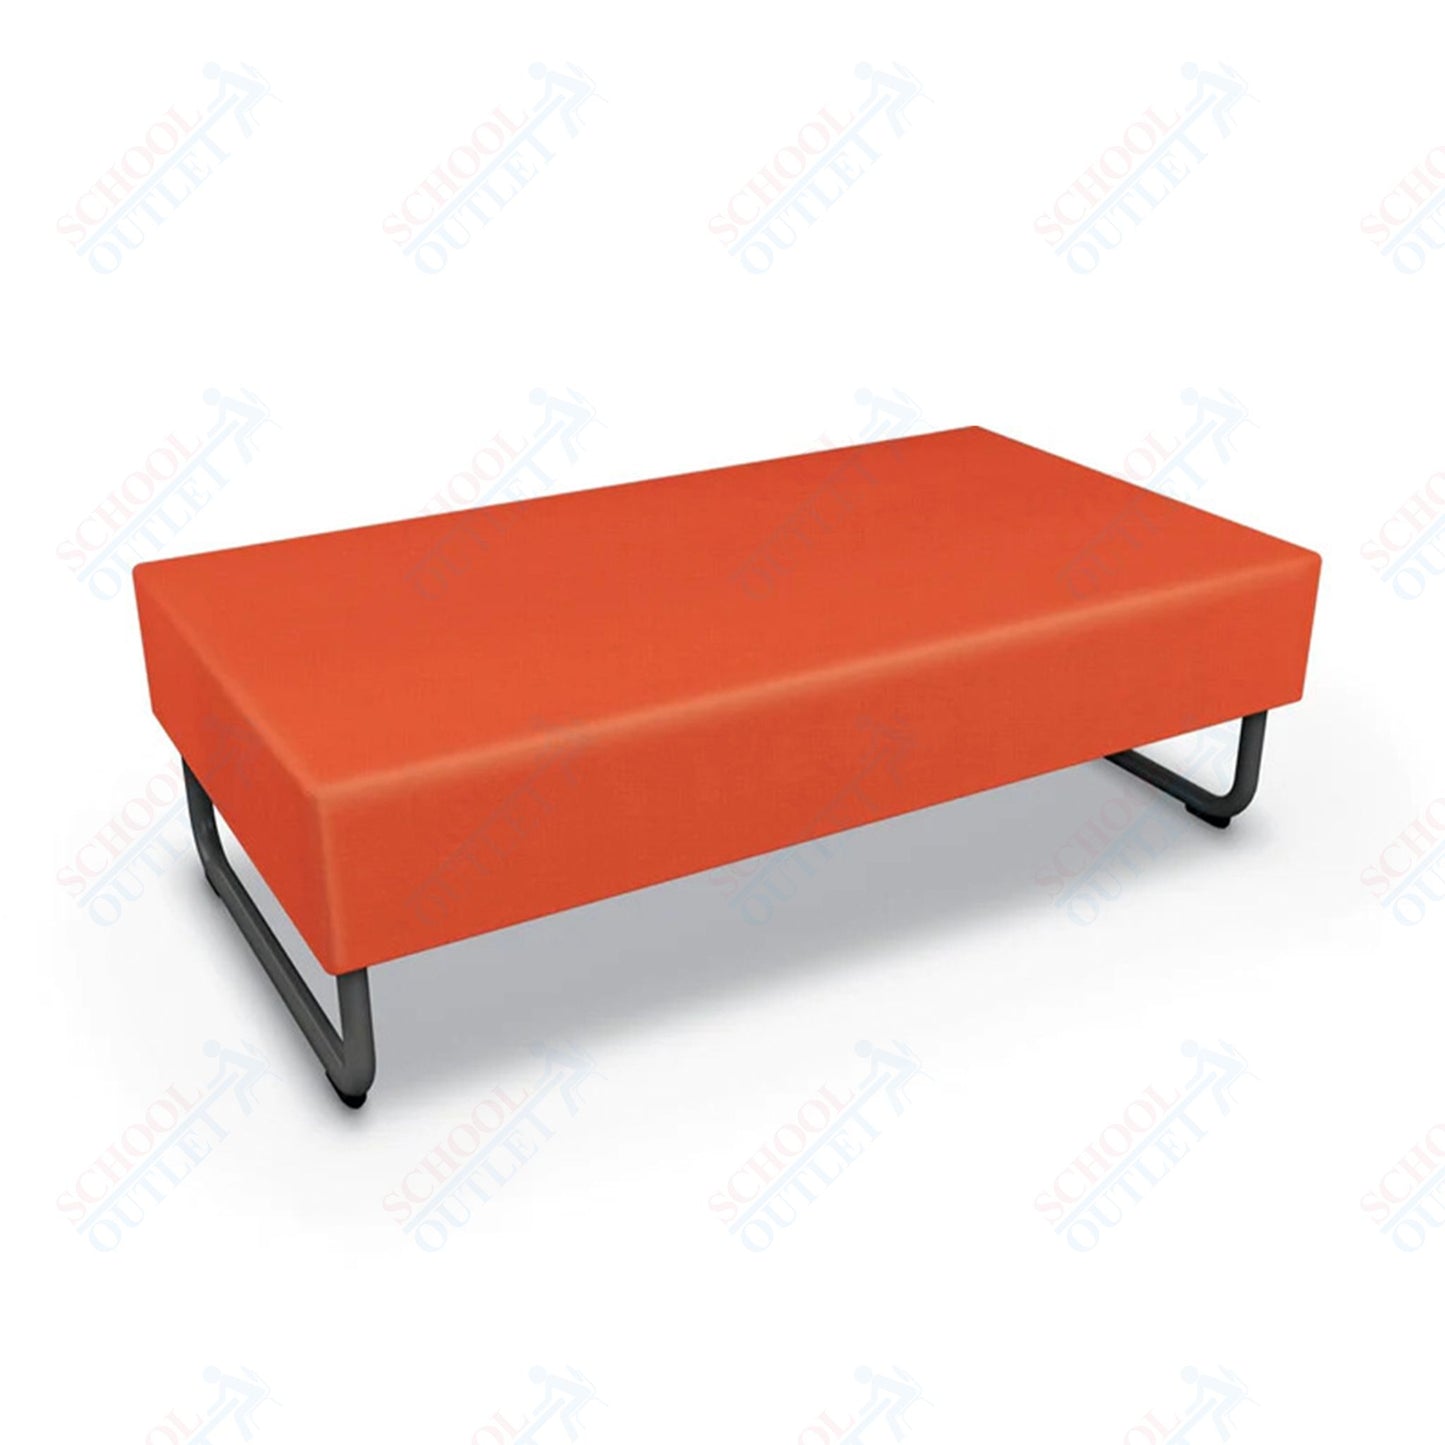 Mooreco Akt Soft Seating Lounge Loveseat Bench - Grade 02 Fabric and Powder Coated Sled Legs